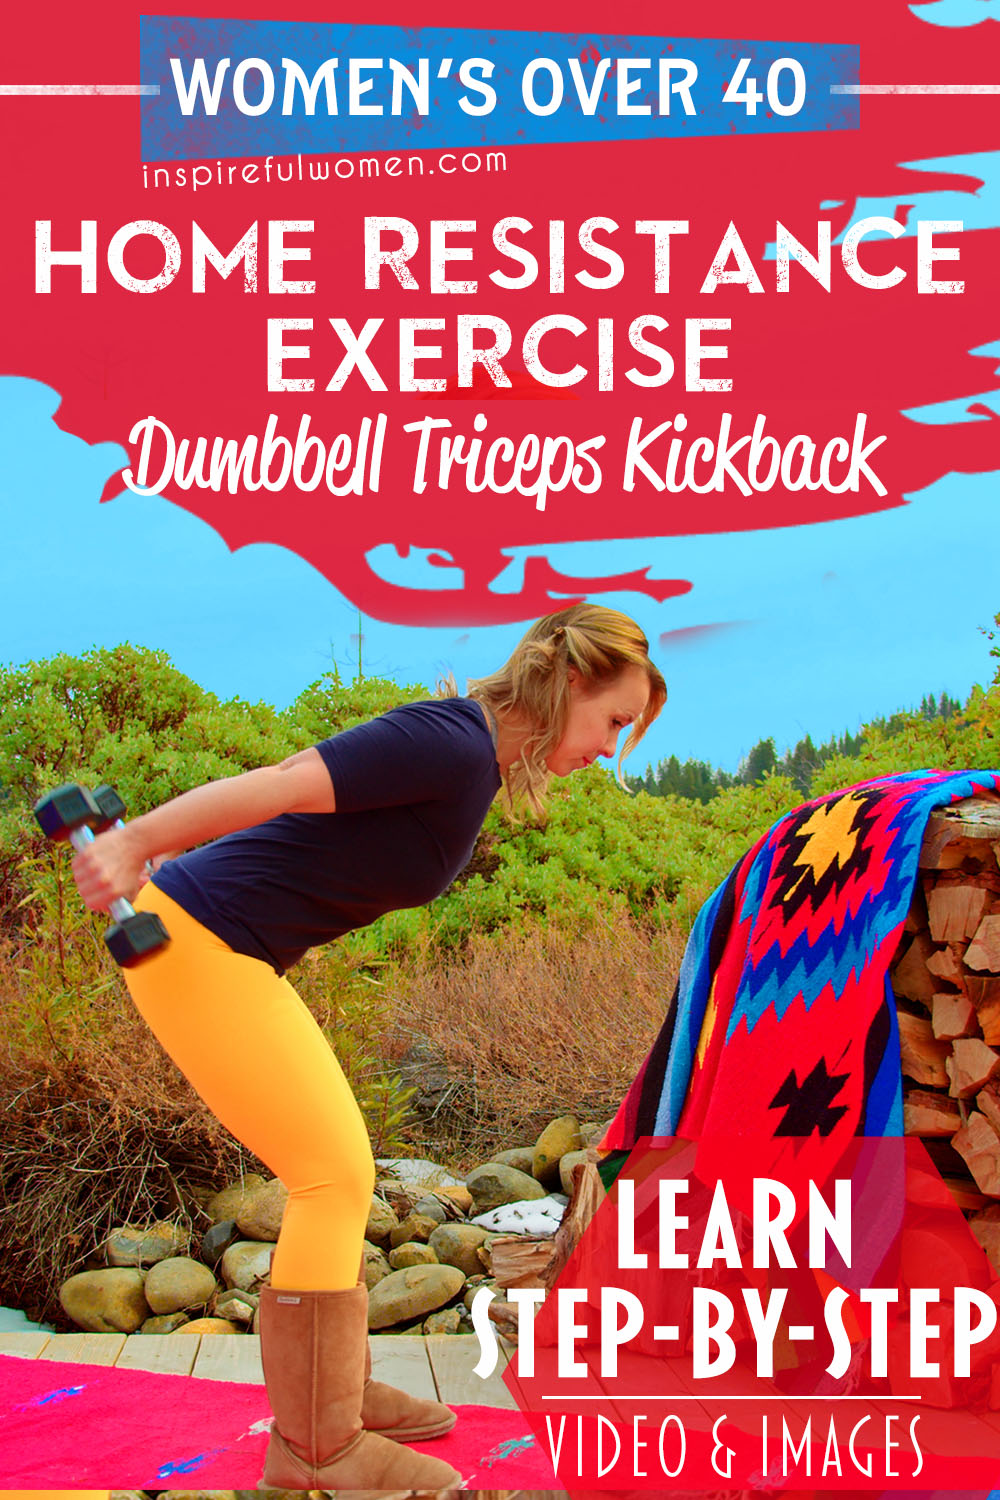 dumbbell-bent-over-triceps-kickback-arm-exercise-at-home-women-40-plus